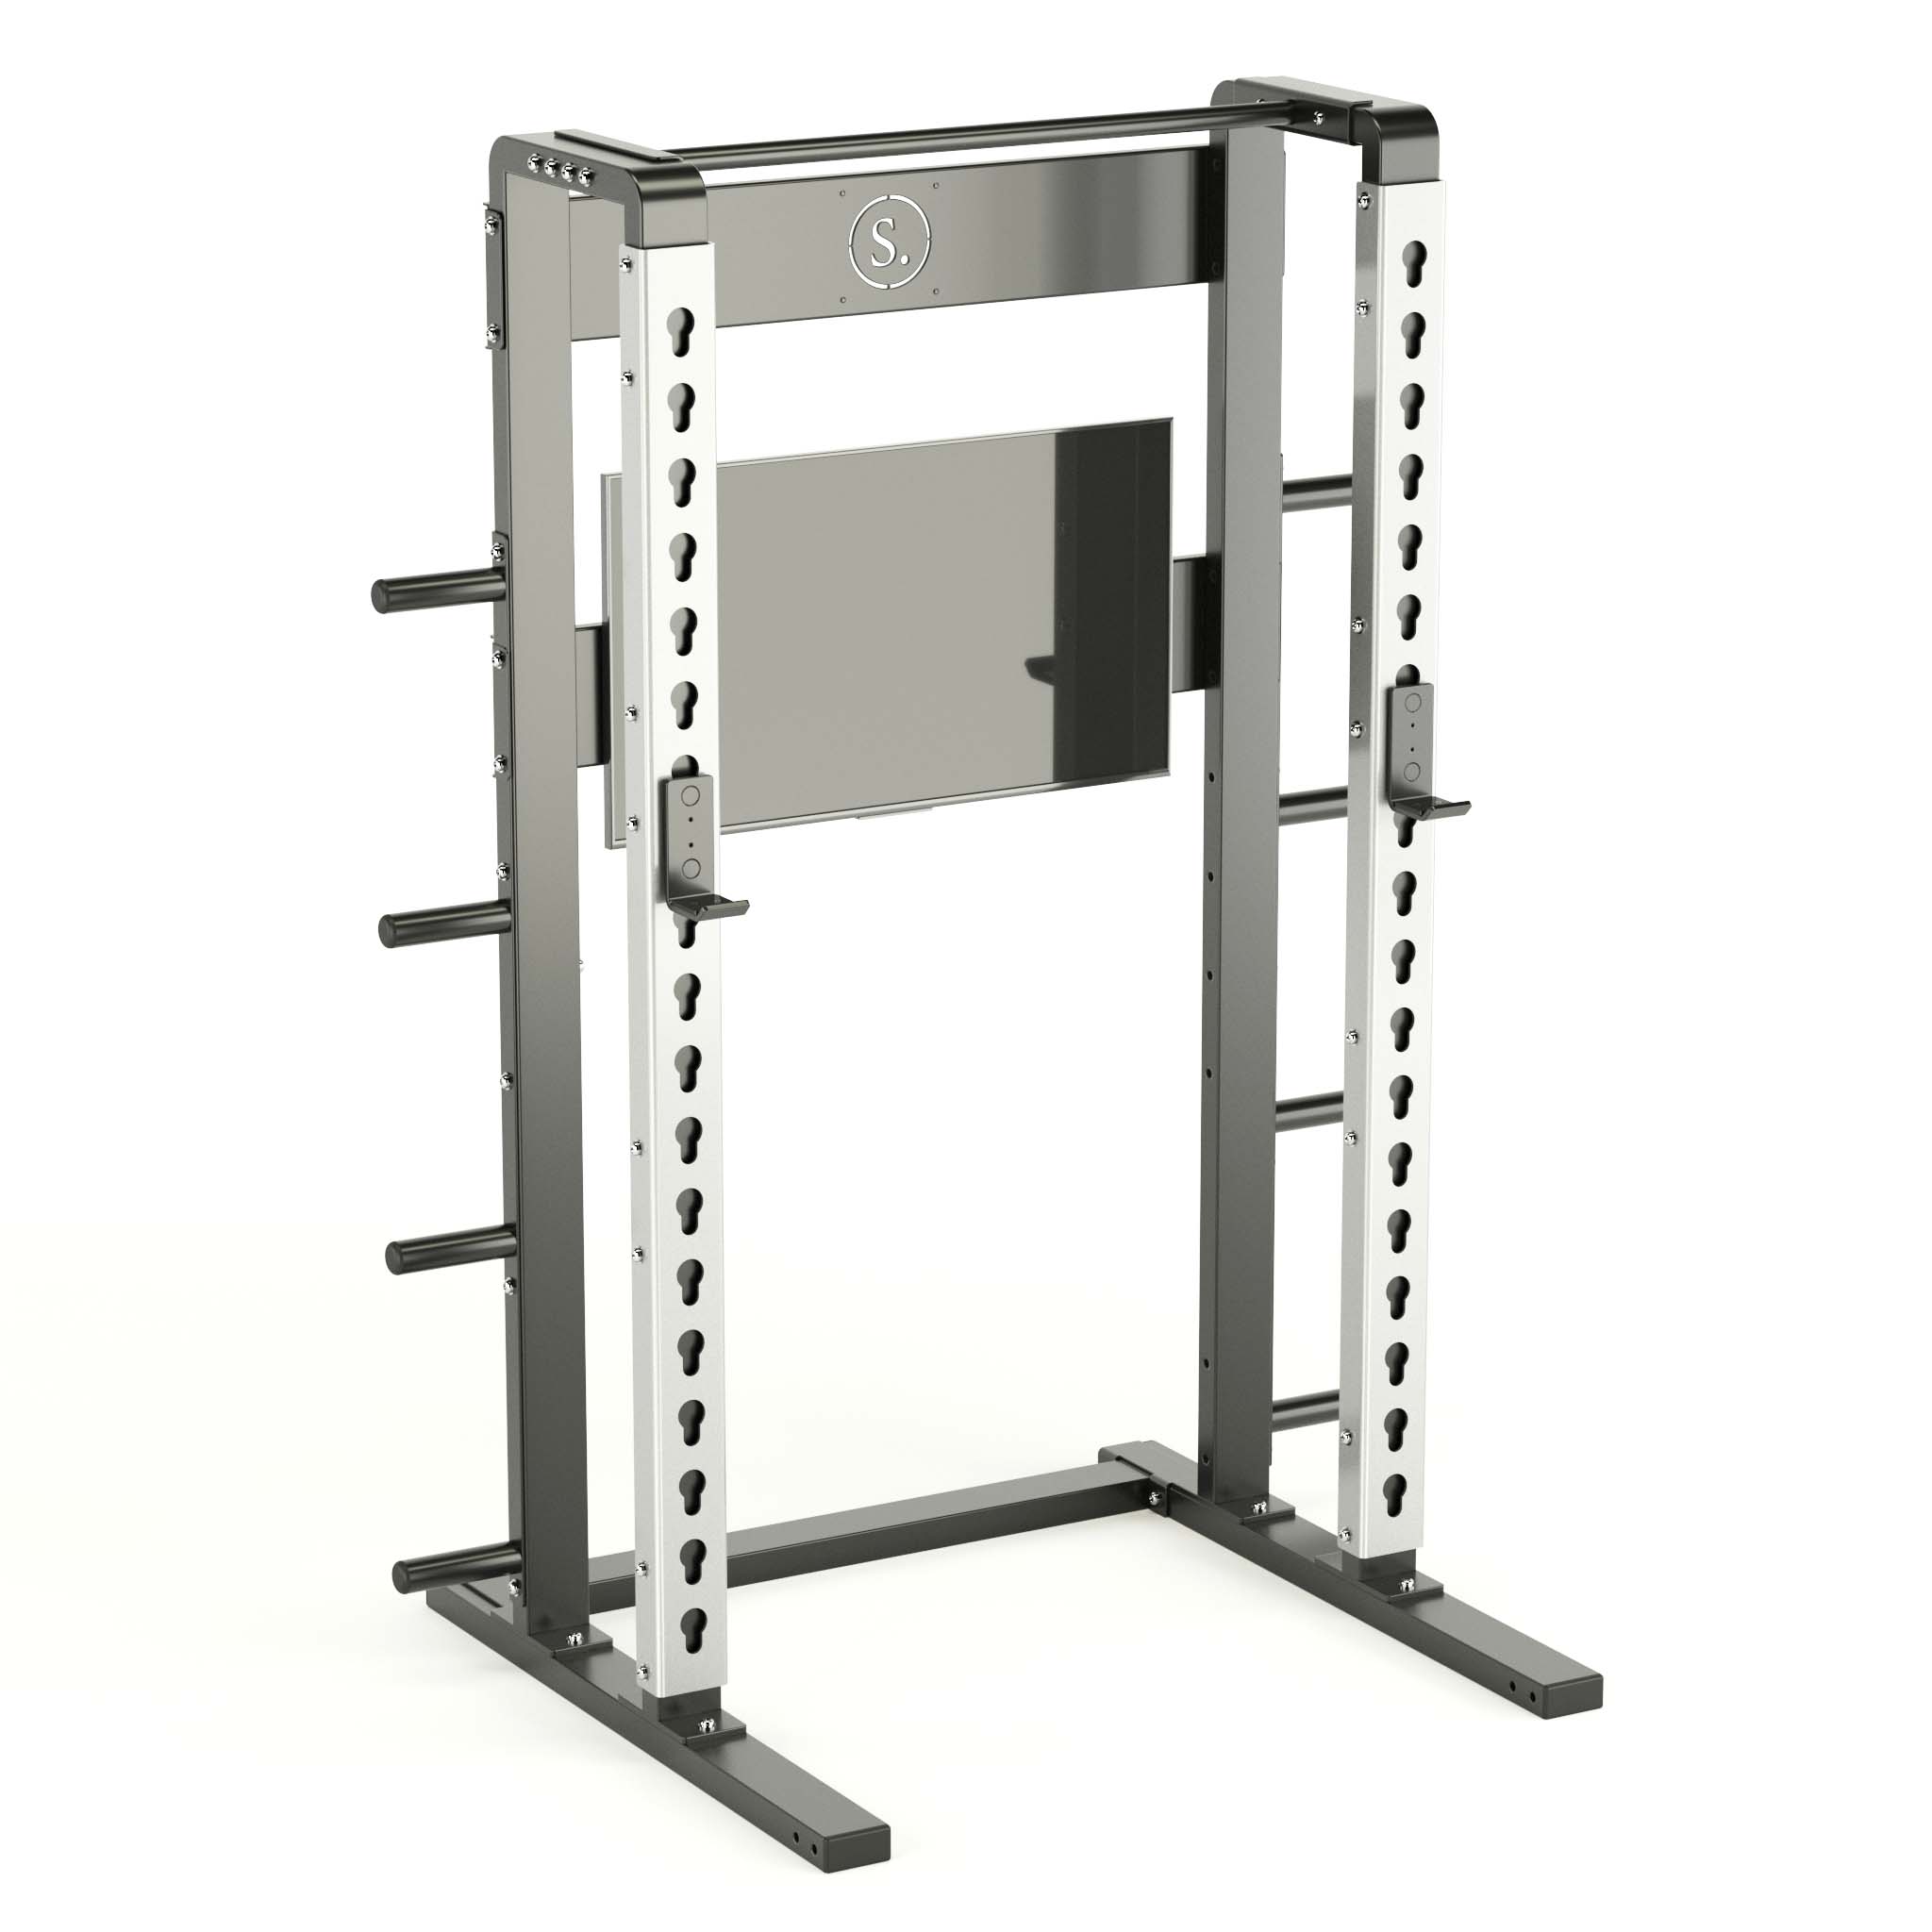 Solo Squat Rack Plus with weight horns in silver